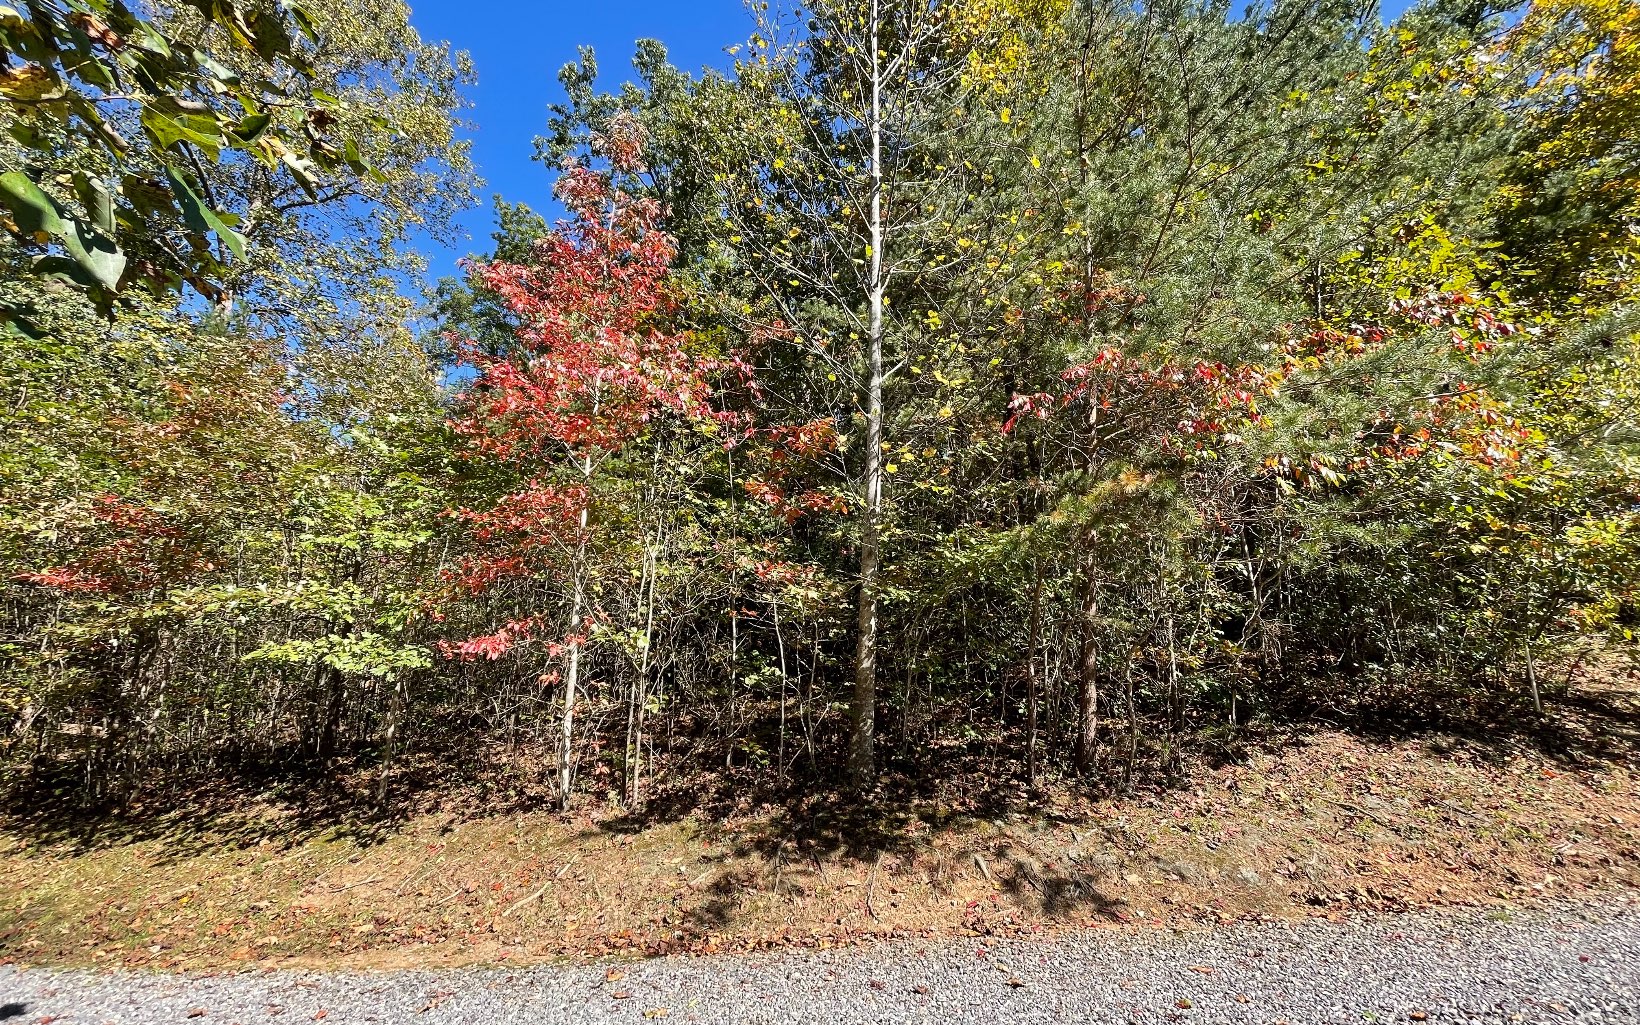 NICE LOT IN NICE SUBDIVISION IN THE NORTH GEORGIA MOUNTAINS!! Wonderful subdivision with upscale and well kept homes. Underground utilities, paved streets, close to town. Great building site with mountain views, come build that dream home, or weekend getaway.